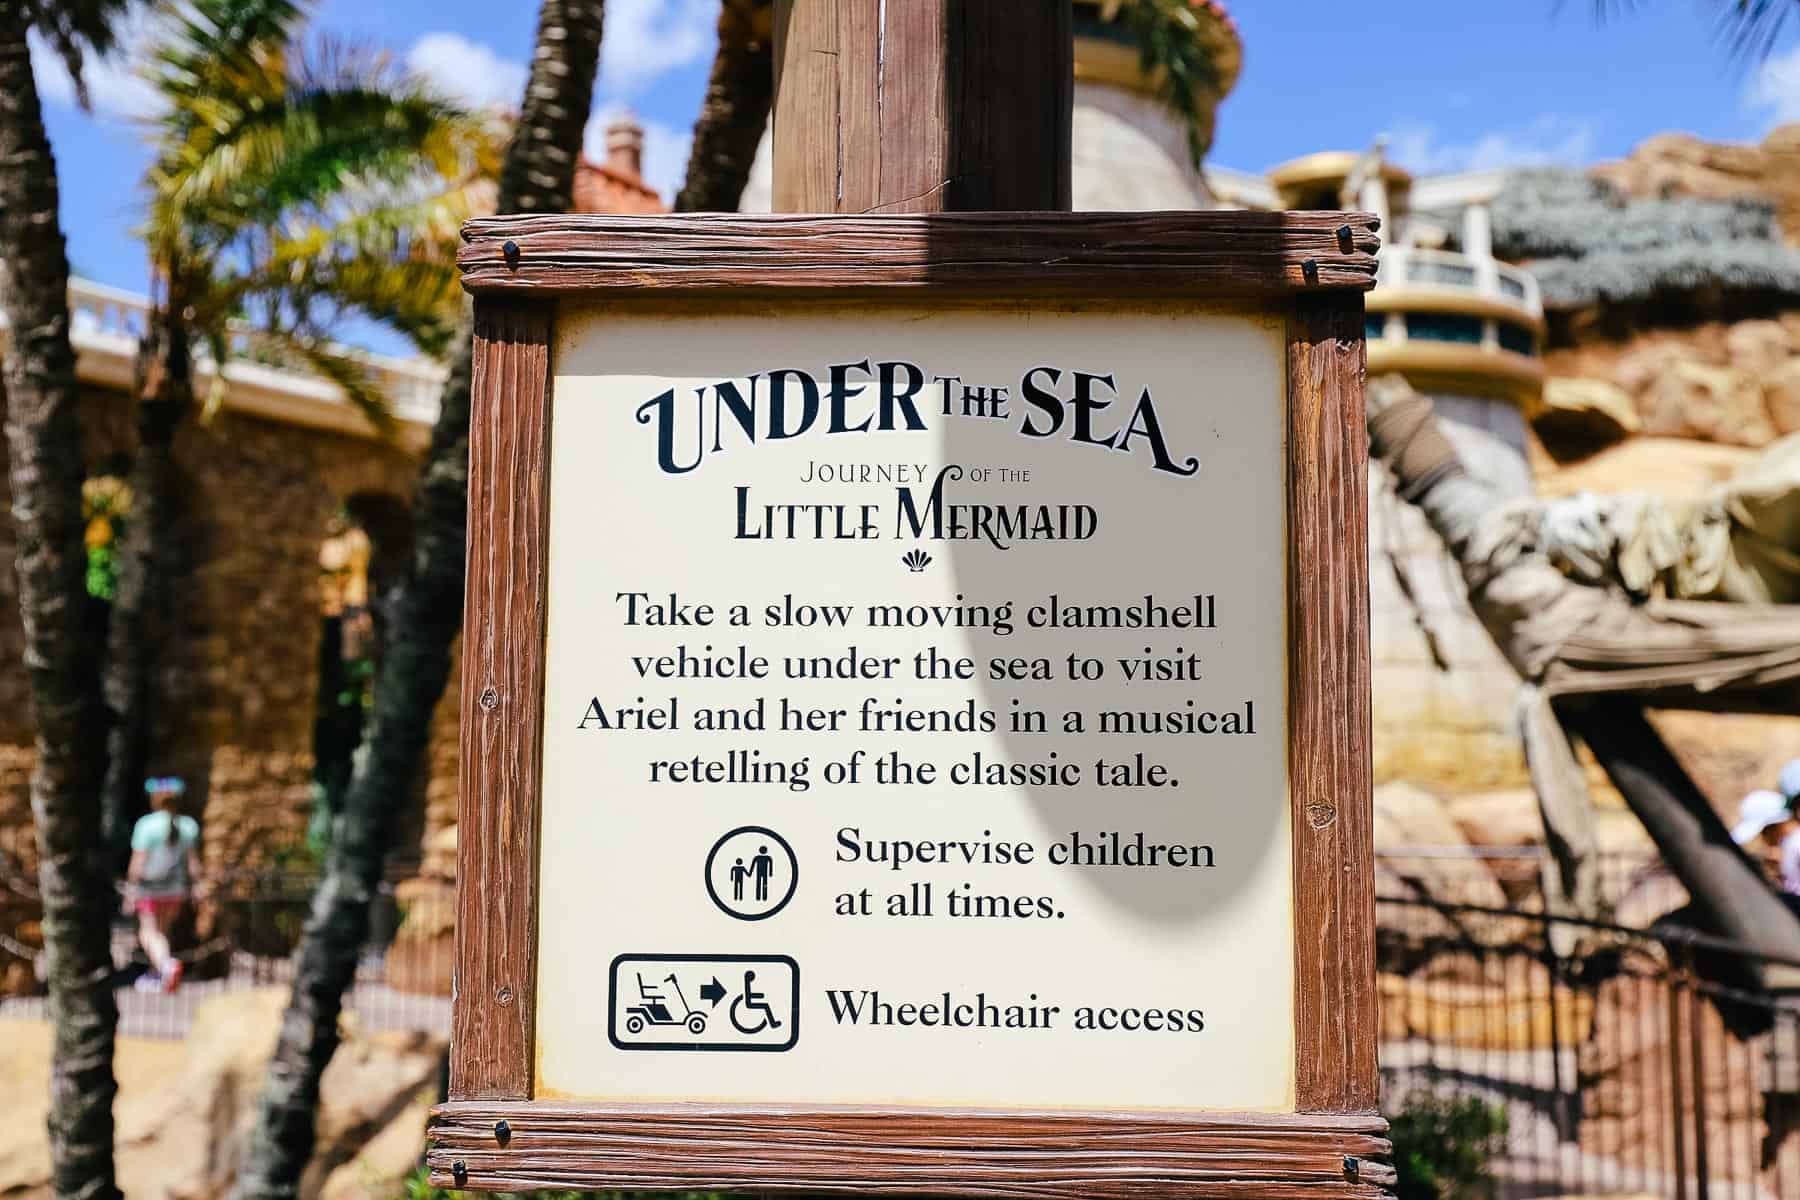 Ride rules for Under the Sea Journey of the Little Mermaid says, "Take a slow moving clamshell under the sea to visit Ariel and her friends in a musical retelling of the classic tale." 